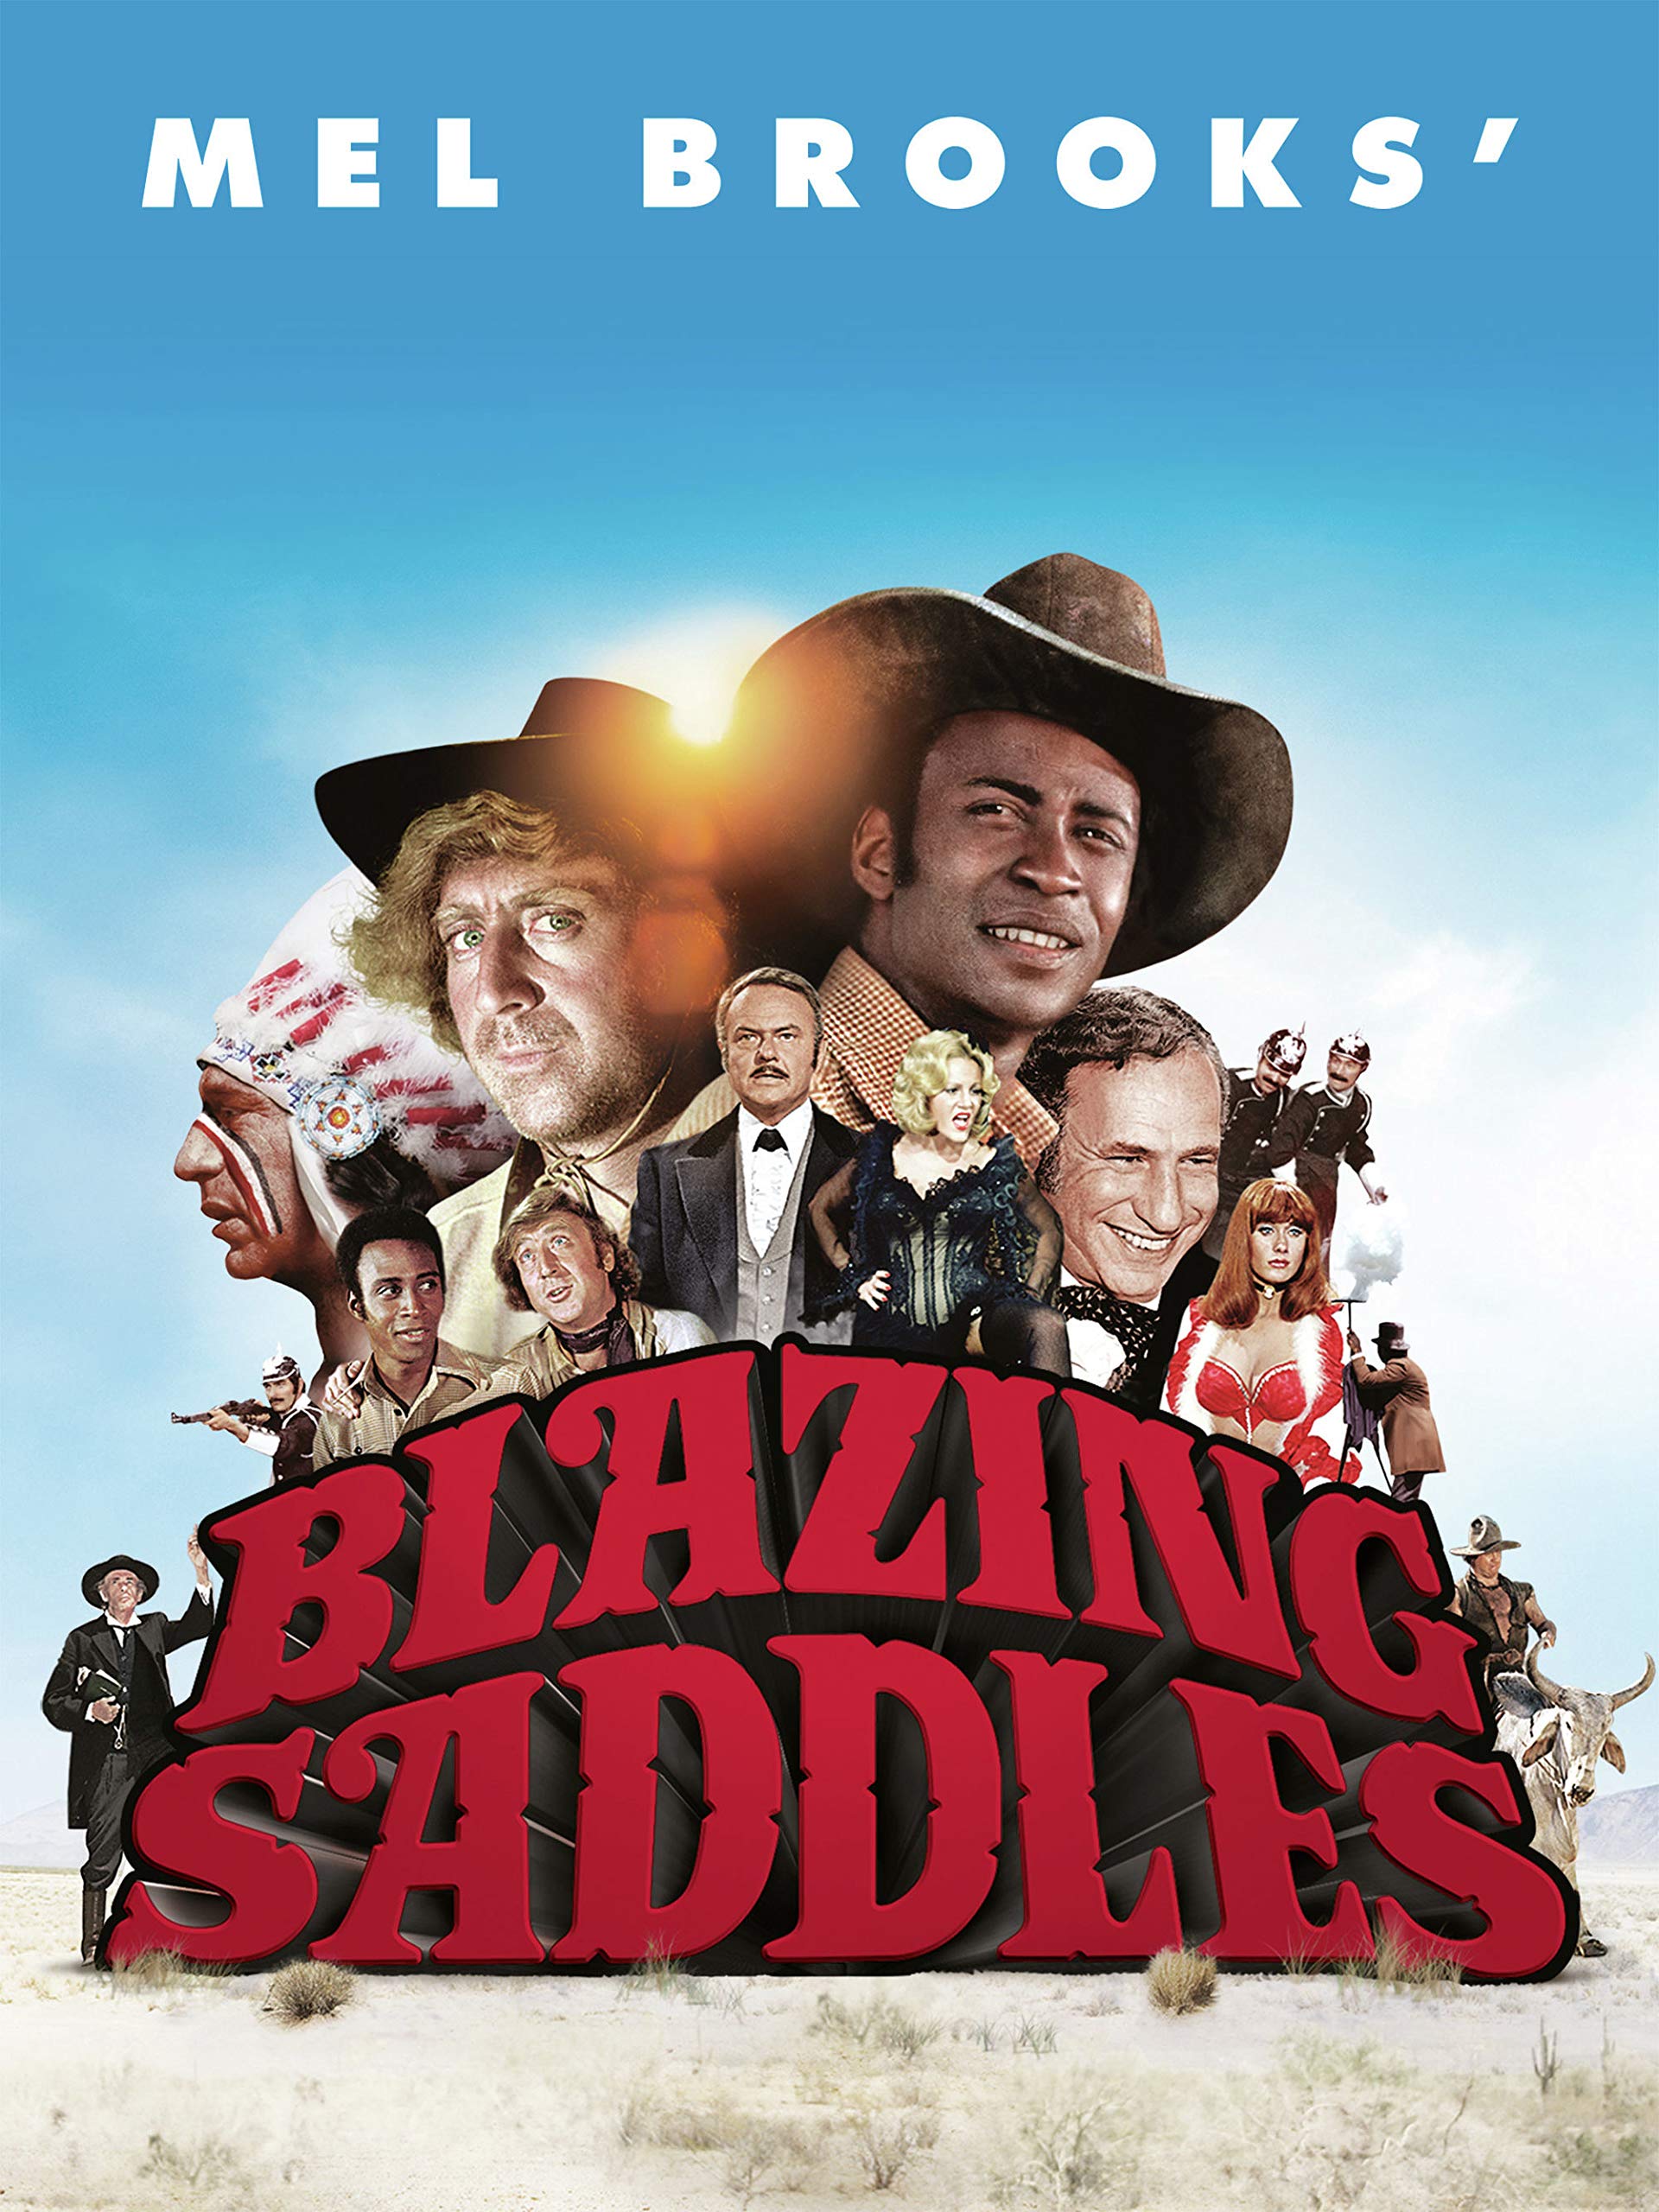 If Blazing Saddles Was About Fernandina Beach It Would Have Been Considered A Documentary